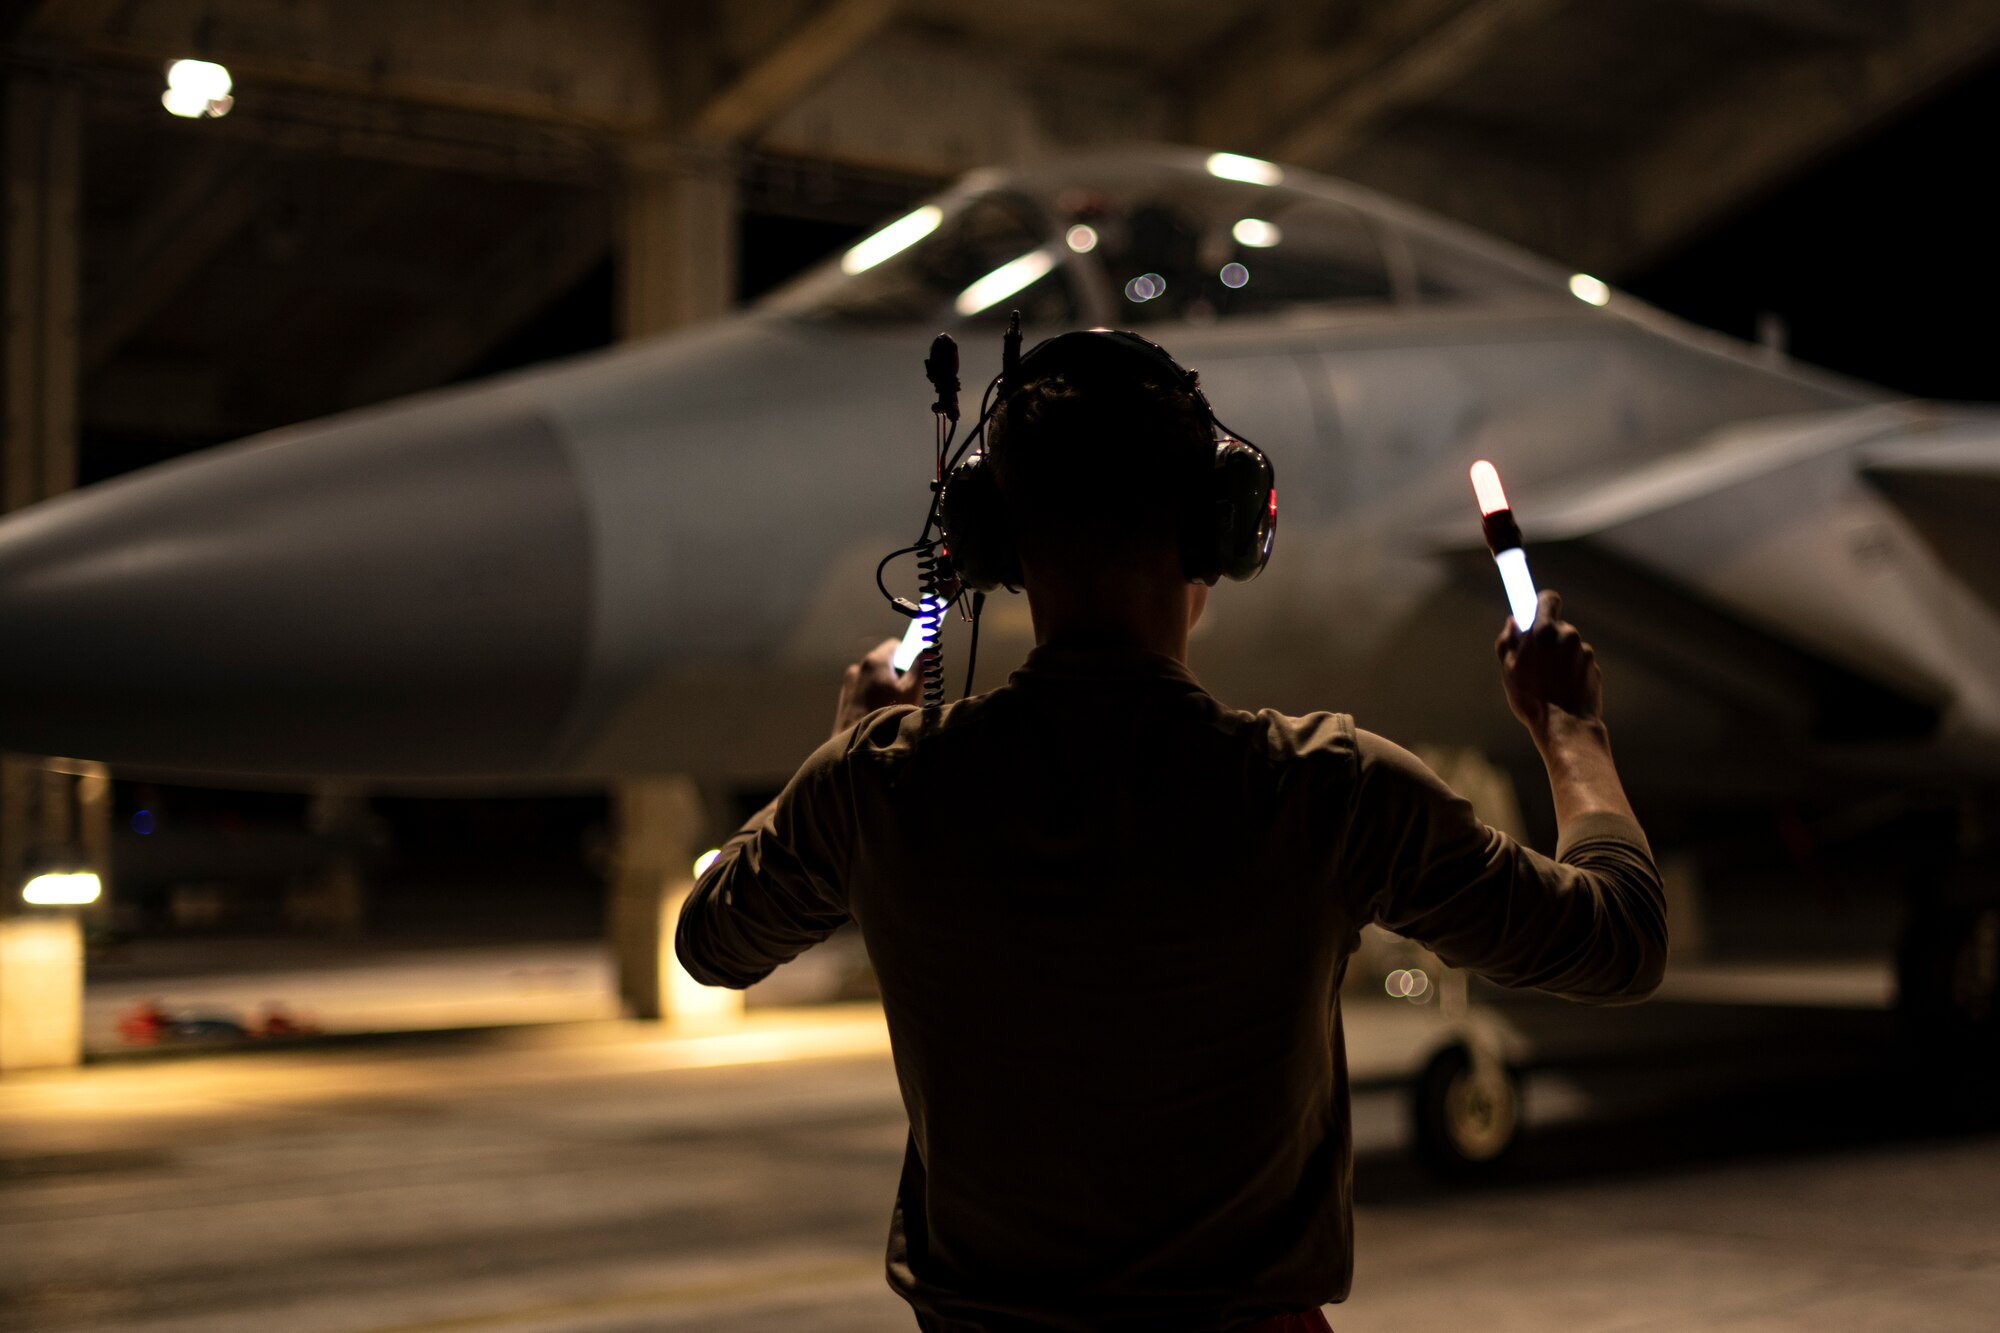 U.S. Air Force Senior Airman Jonah Juve, 44th Aircraft Maintenance Unit crew chief, marshals an F-15C Eagle into the aircraft shelter after a training sortie in support of Exercise Southern Beach at Kadena Air Base, Japan, Oct. 28, 2021. This was the first time since the inception of Southern Beach where the majority of the mission sets and a Japan-U.S. training program were conducted during night hours. (U.S. Air Force photo by Senior Airman Jessi Monte)